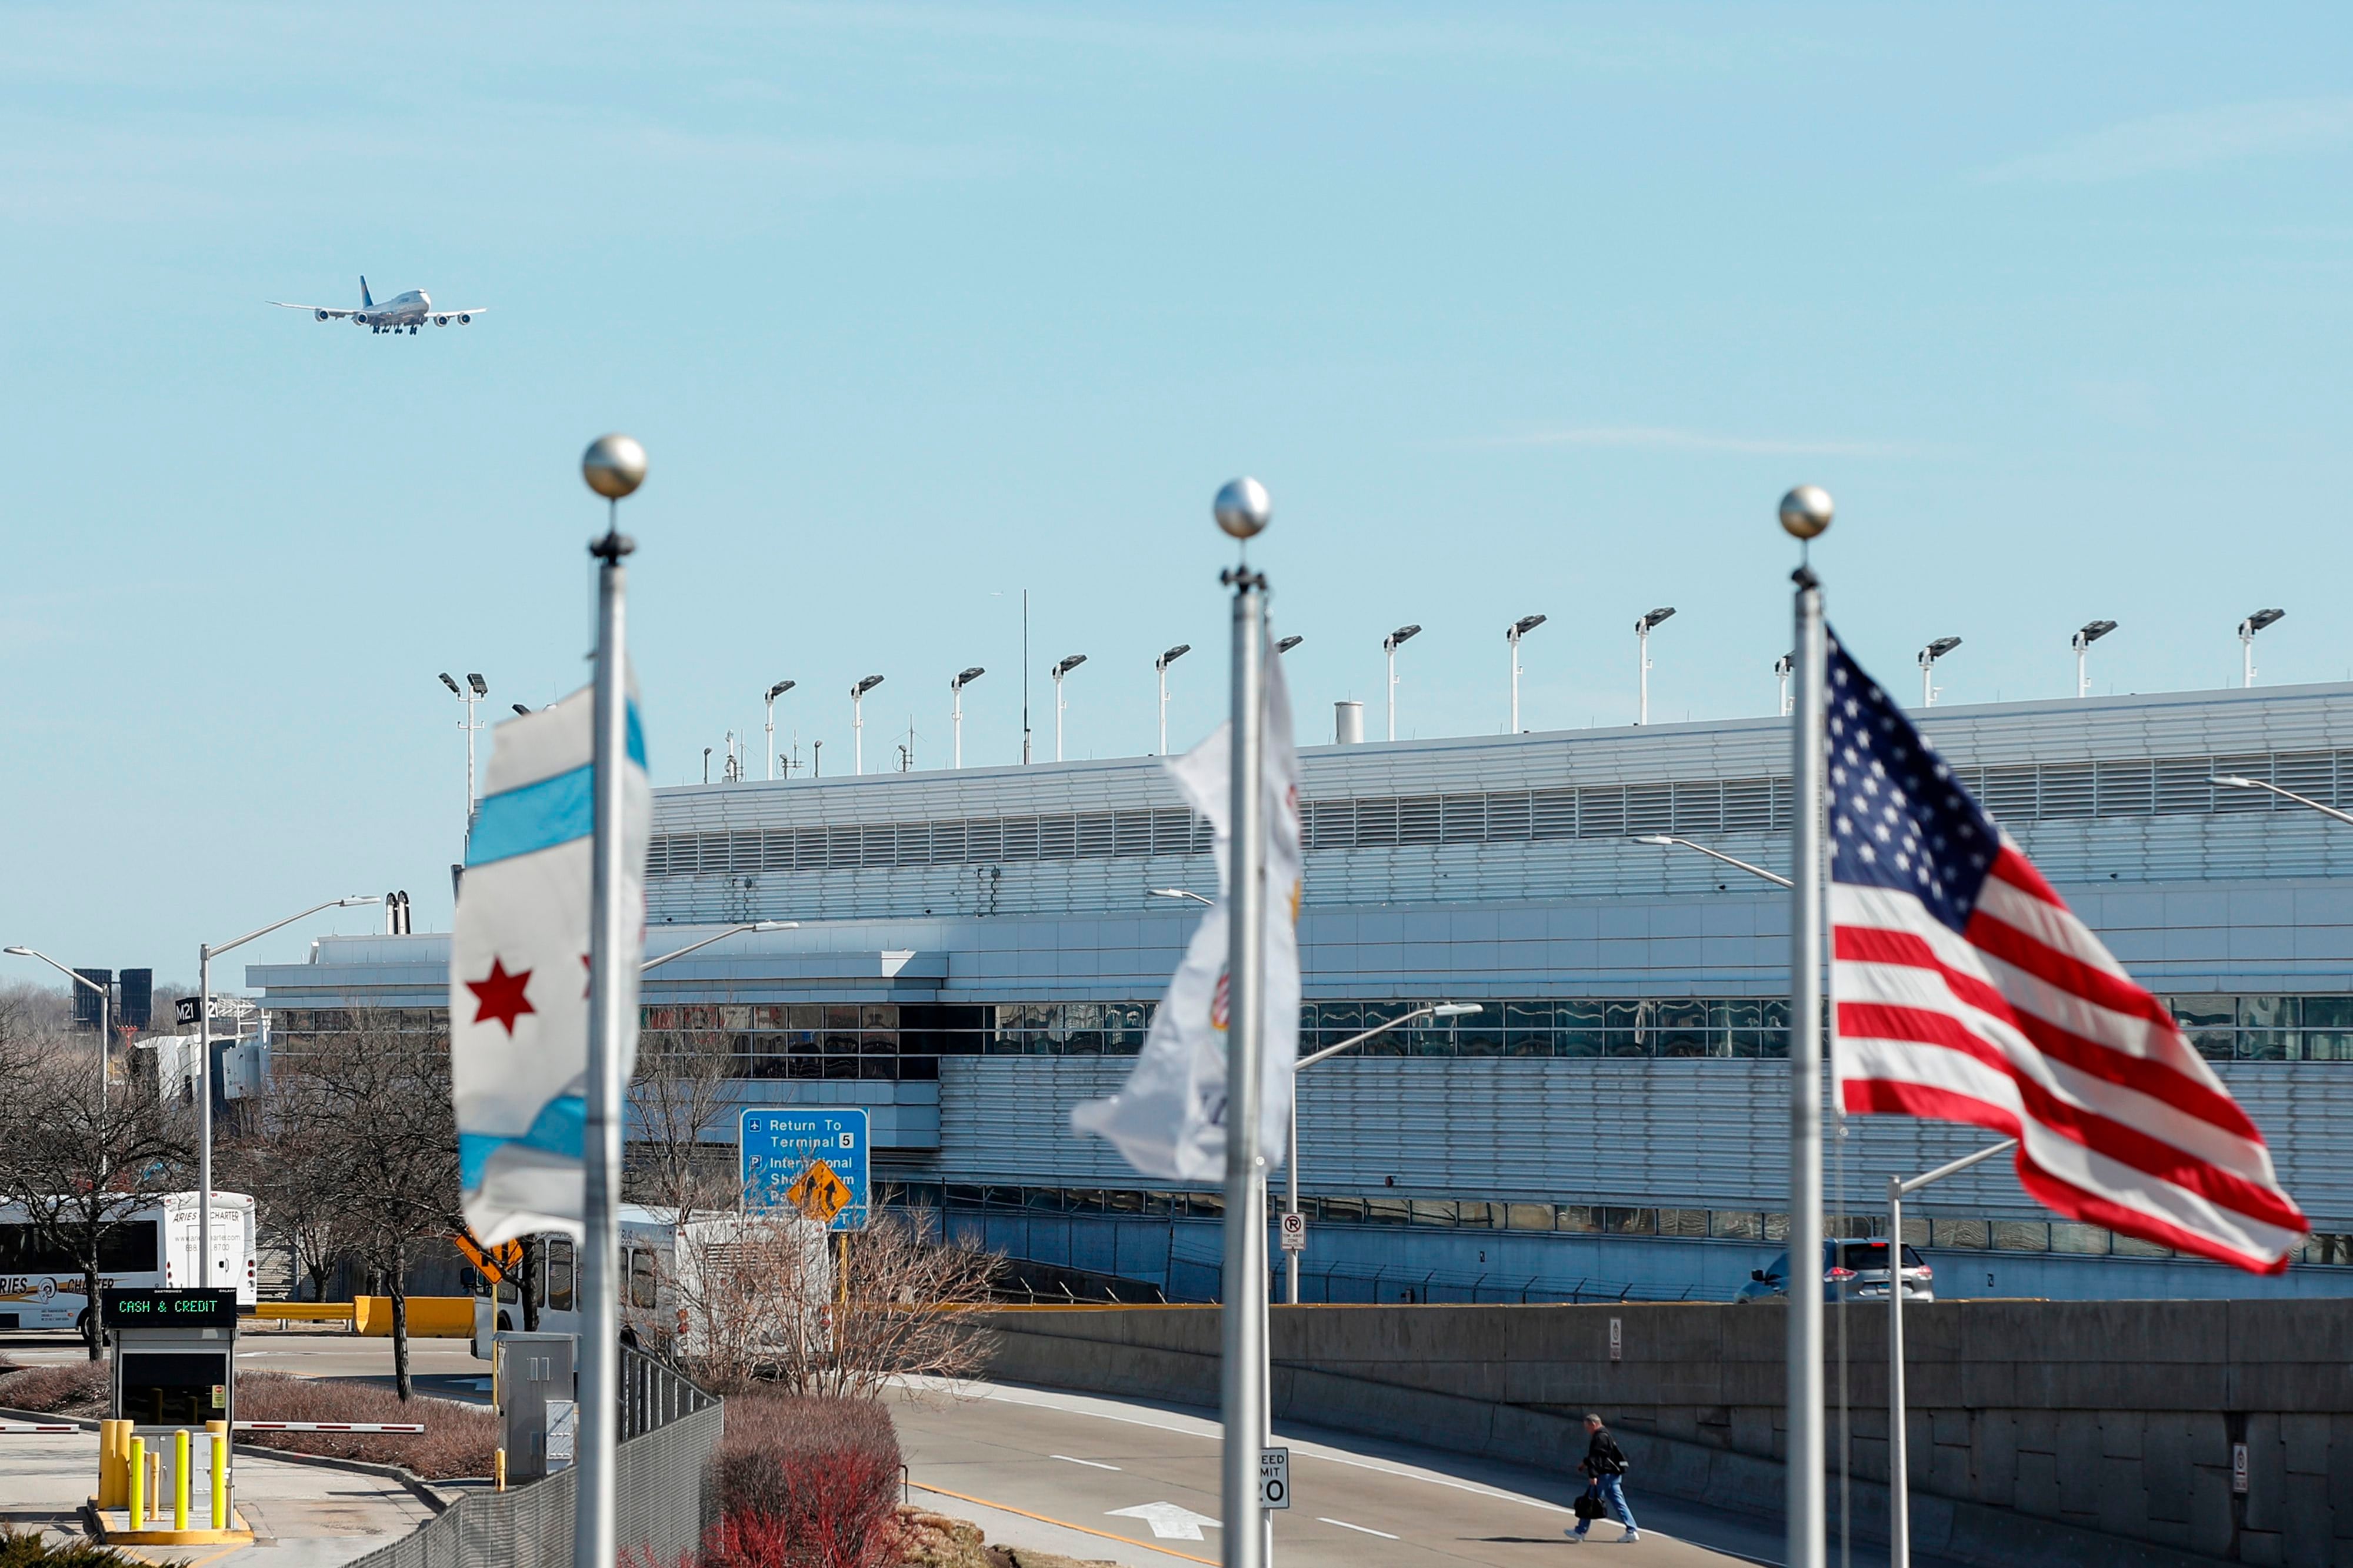 A view of Chicago O’Hare airport as a jet is flying in. The flags of Chicago, Illinois, and the United States fly in the foreground.